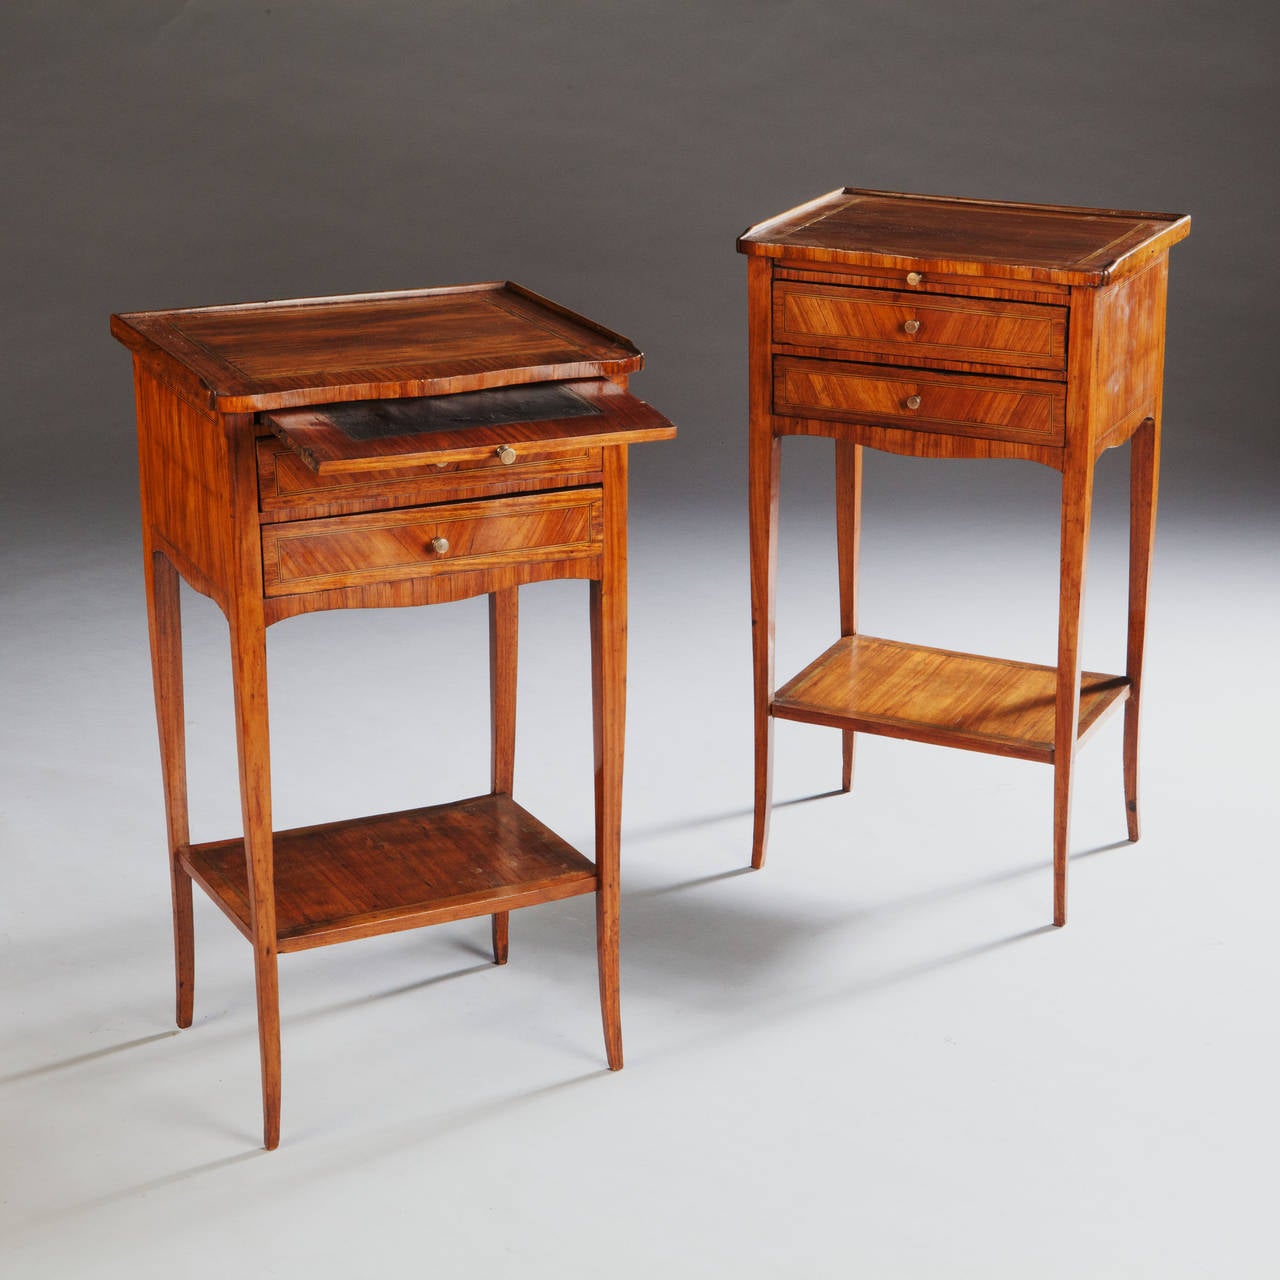 A fine pair of mid nineteenth century tulip wood veneered bedside tables with two drawers and reading slide, all supported on tapering legs.